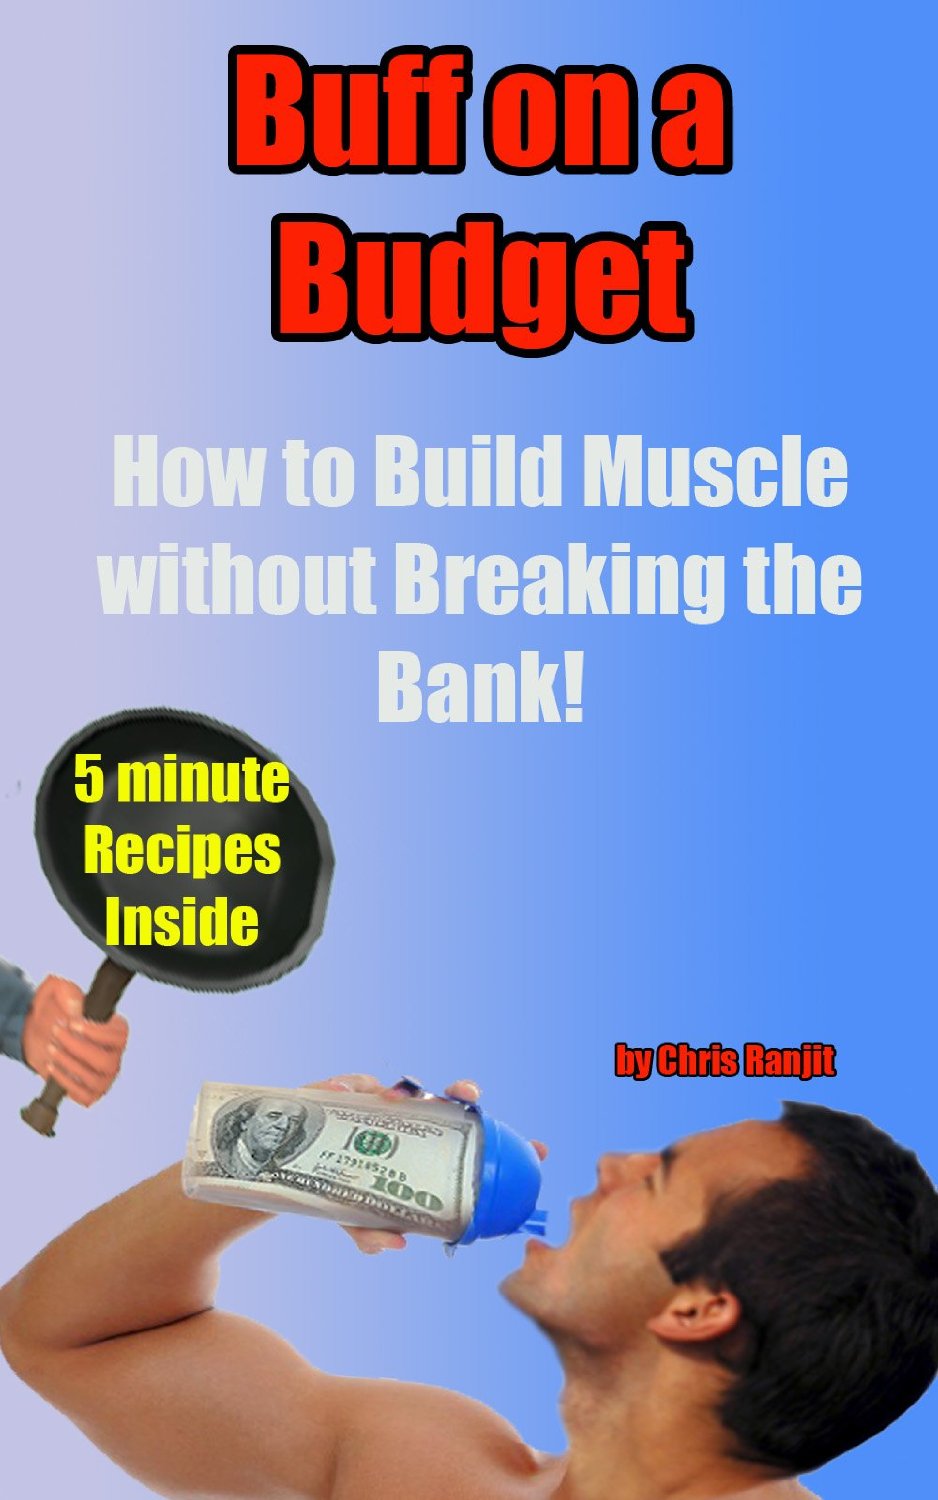 Buff on a Budget: AN AFFORDABLE WAY TO BUILD MUSCLE FAST by Chris Ranjit